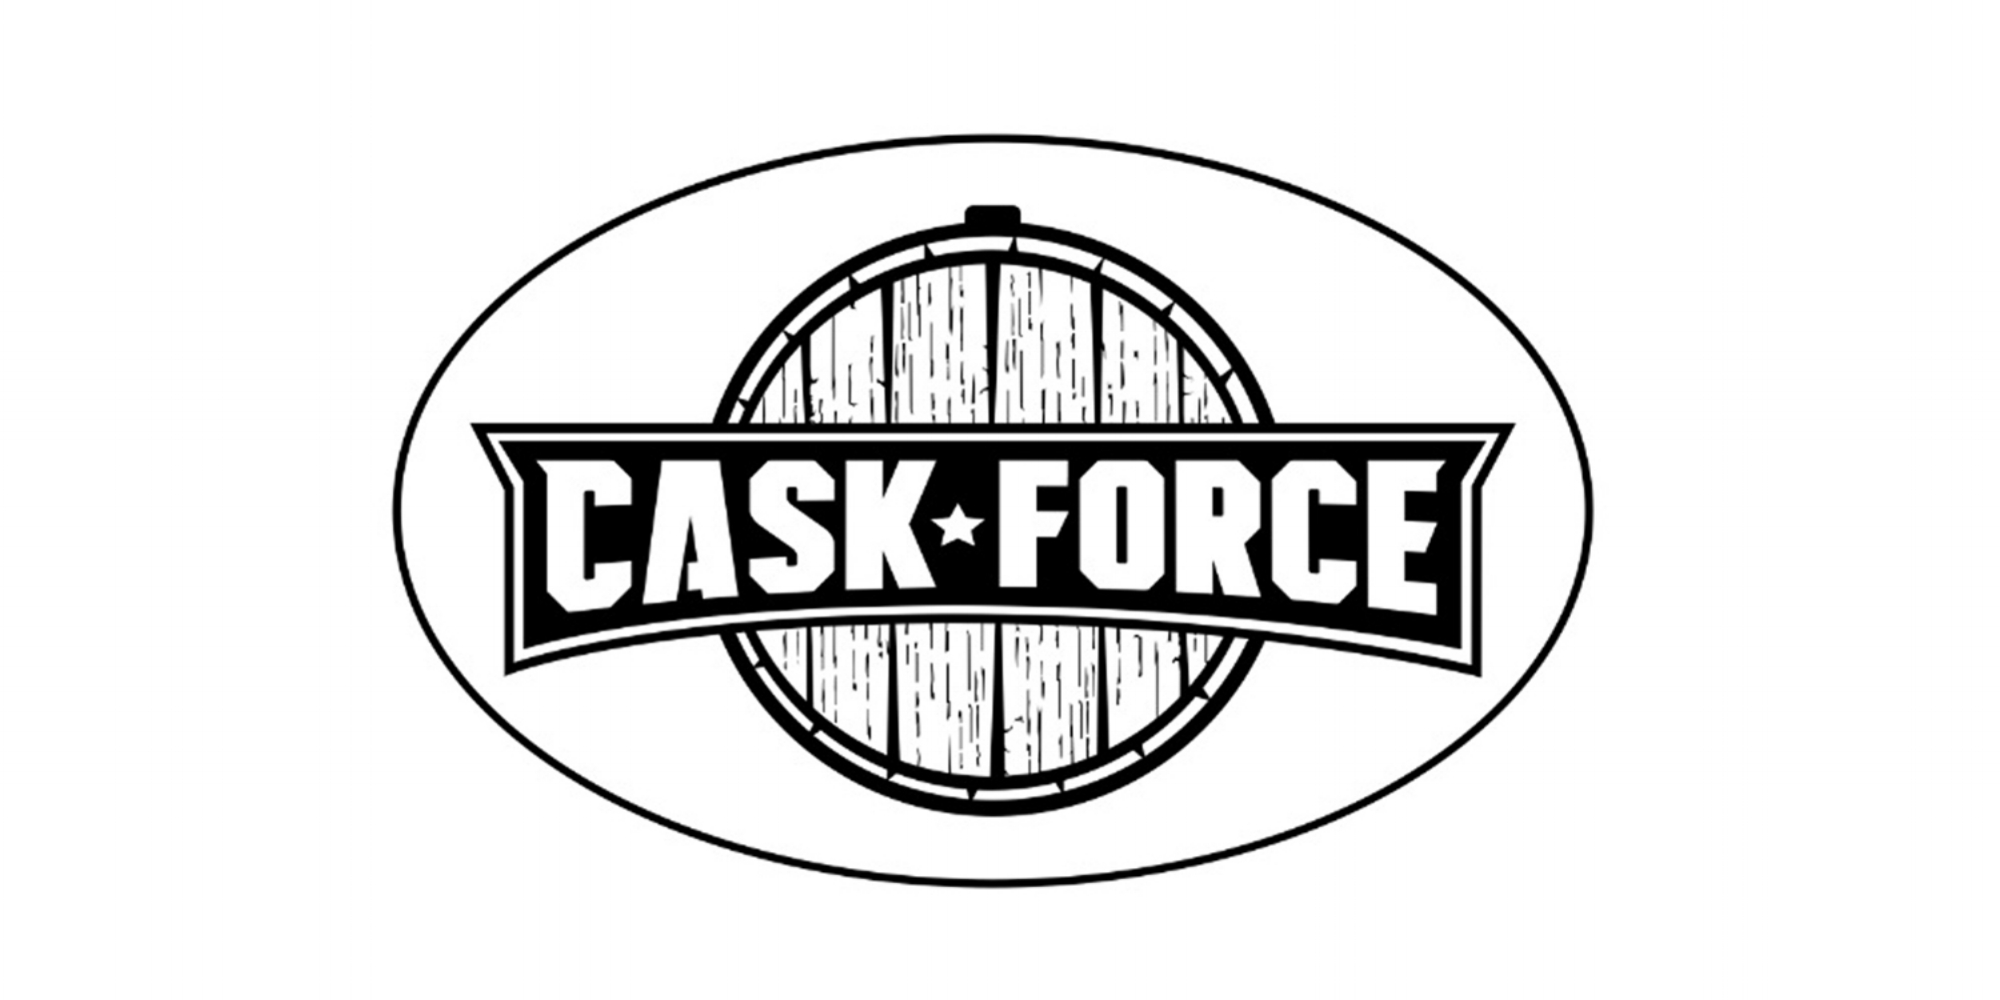 The Cask Force